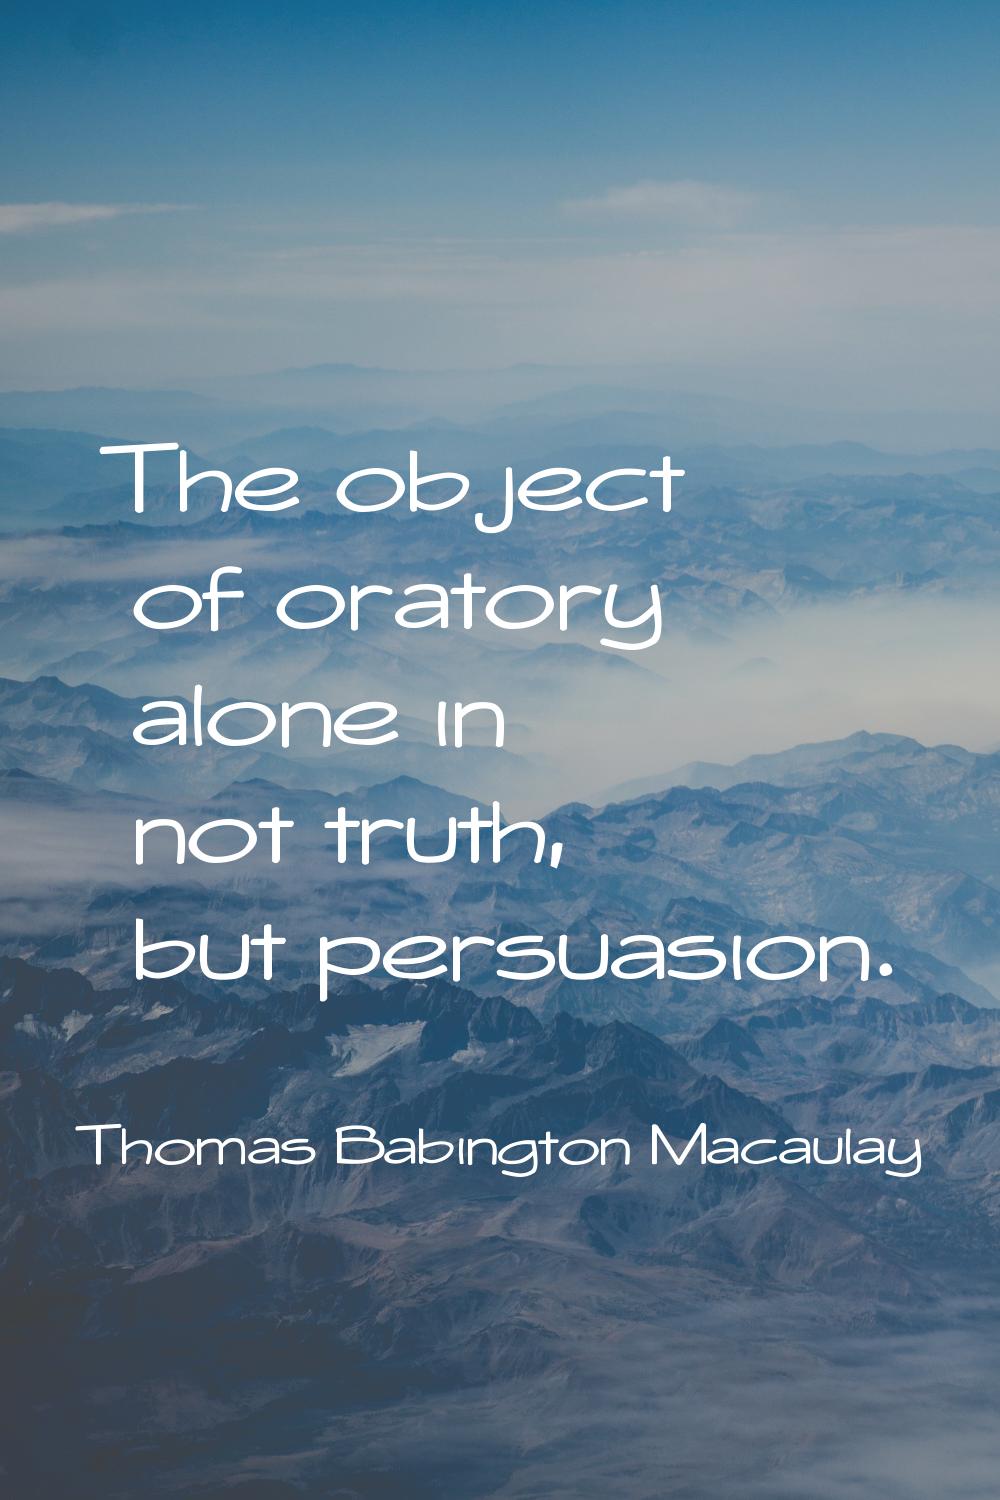 The object of oratory alone in not truth, but persuasion.